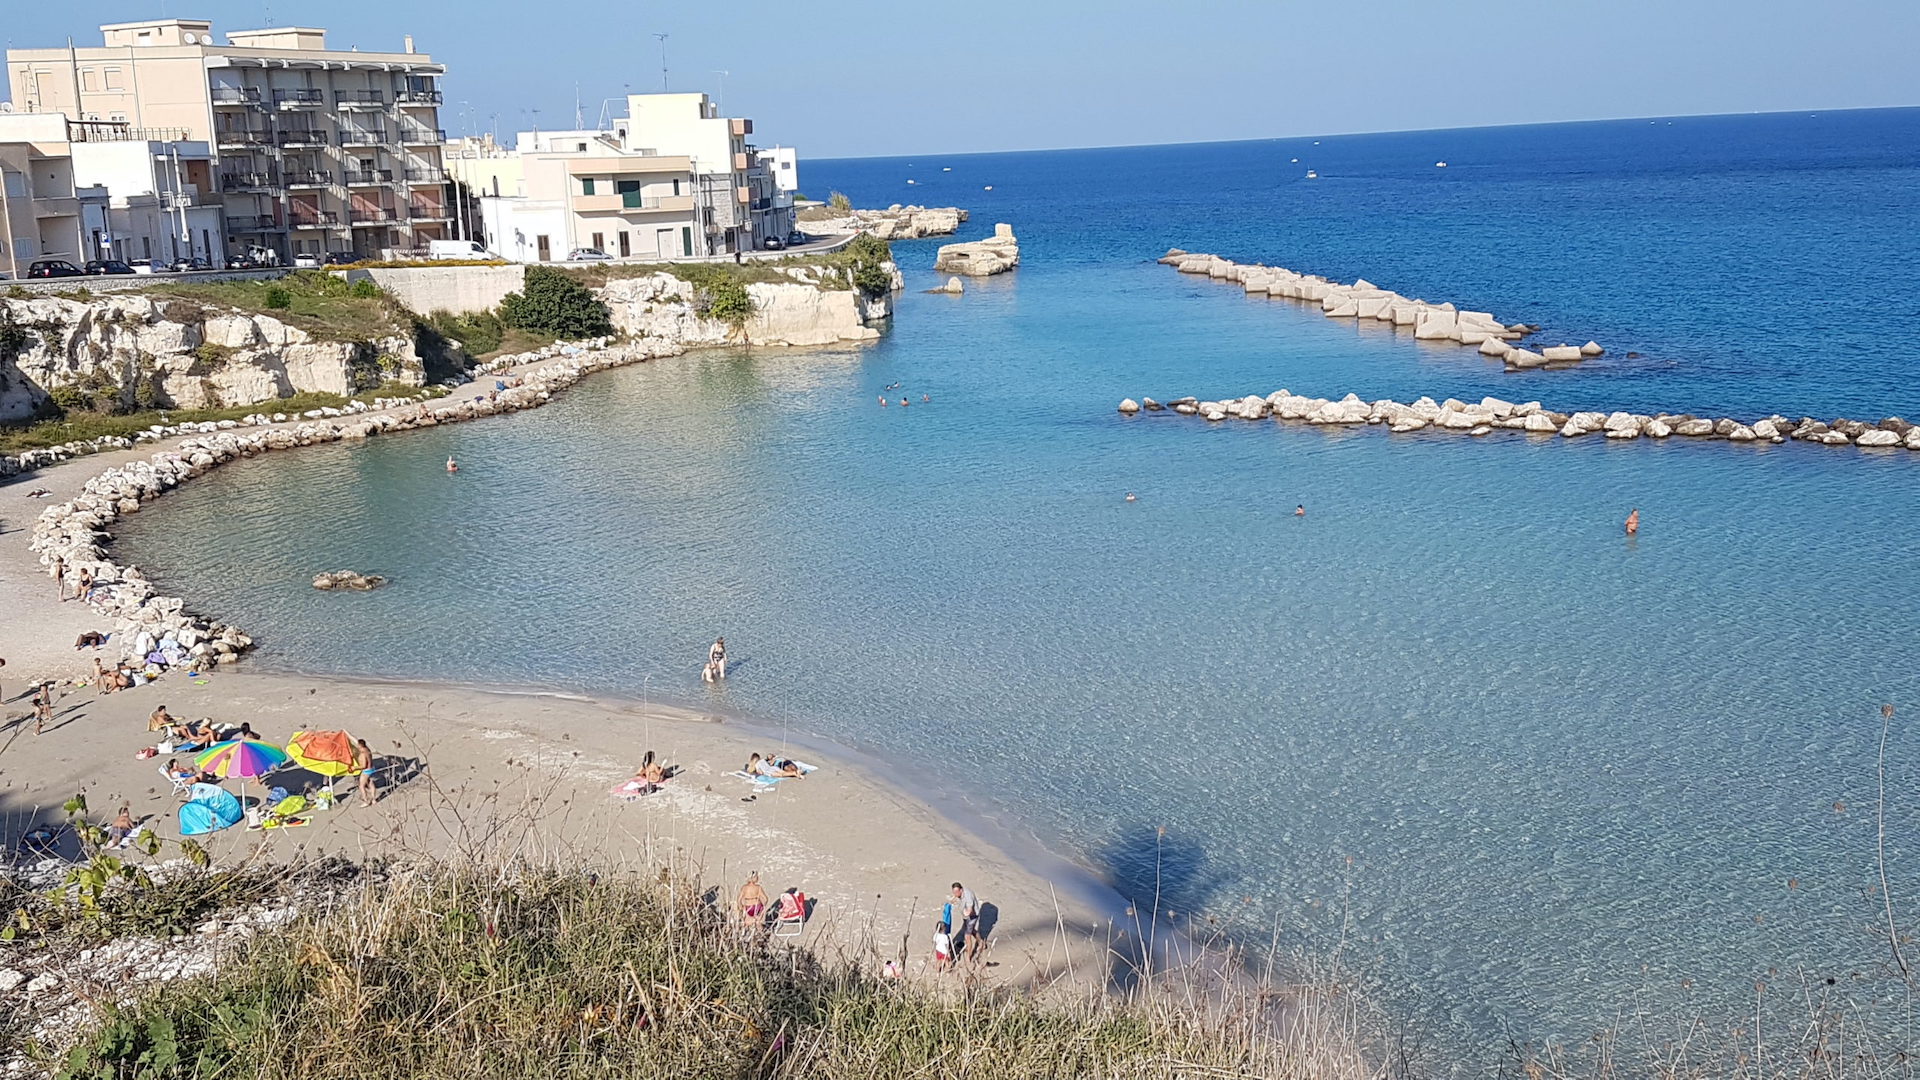 Otranto and surroundings - From the sea to the lakes in the beauty of the hinterland